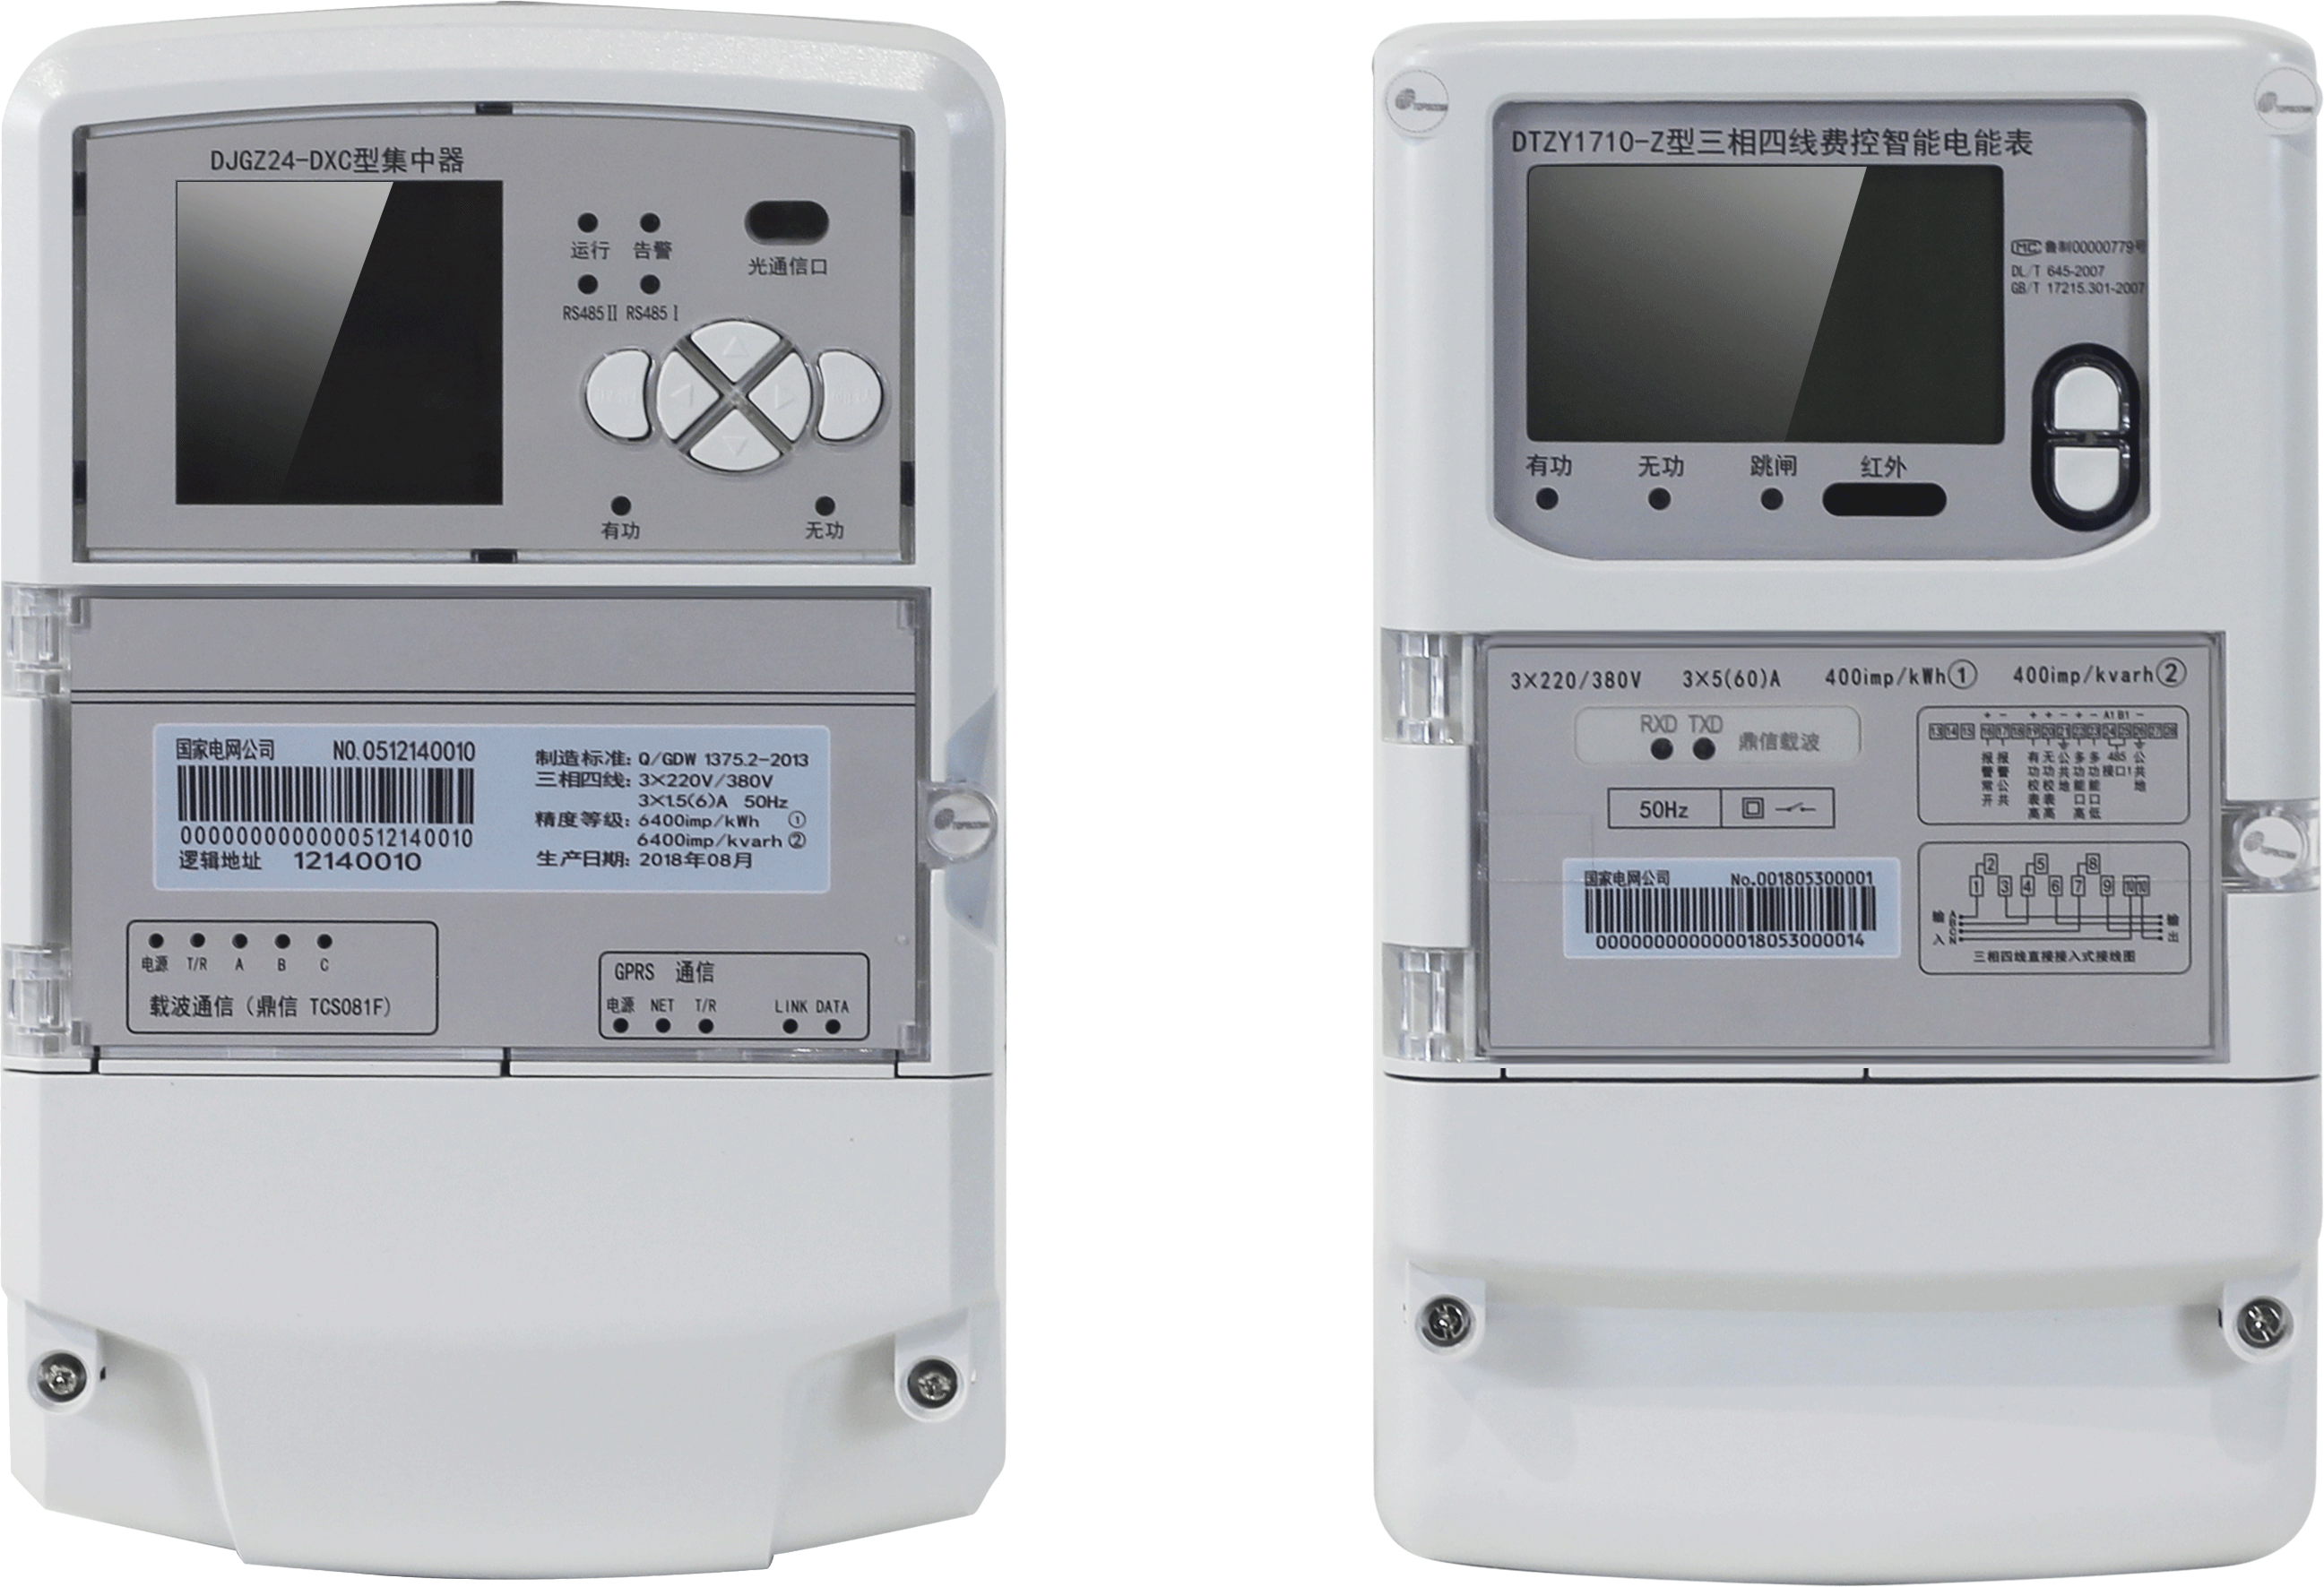 PC compound for smart meters